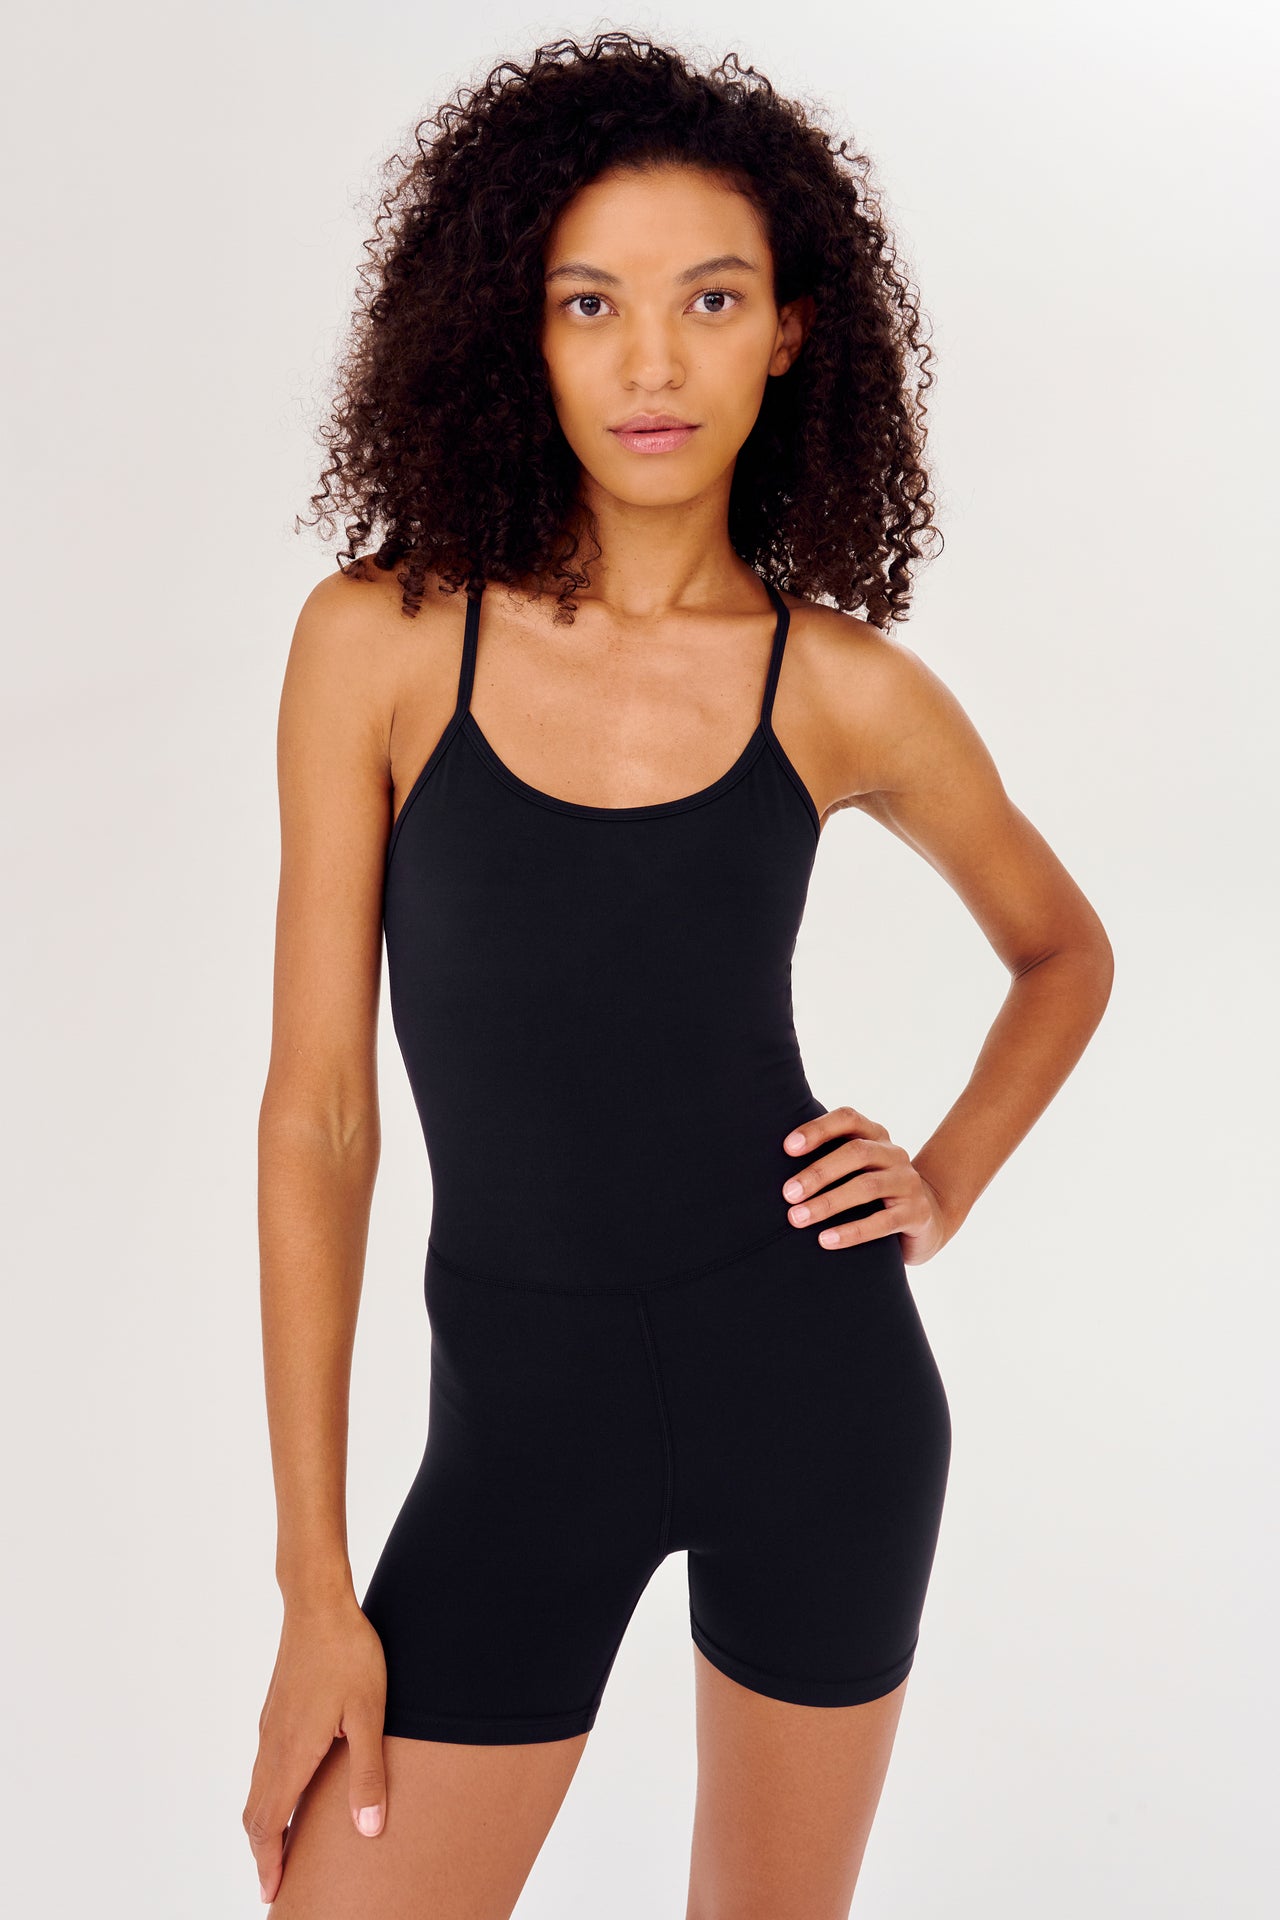 Full front view of black high thigh spaghetti strap body suit/one piece